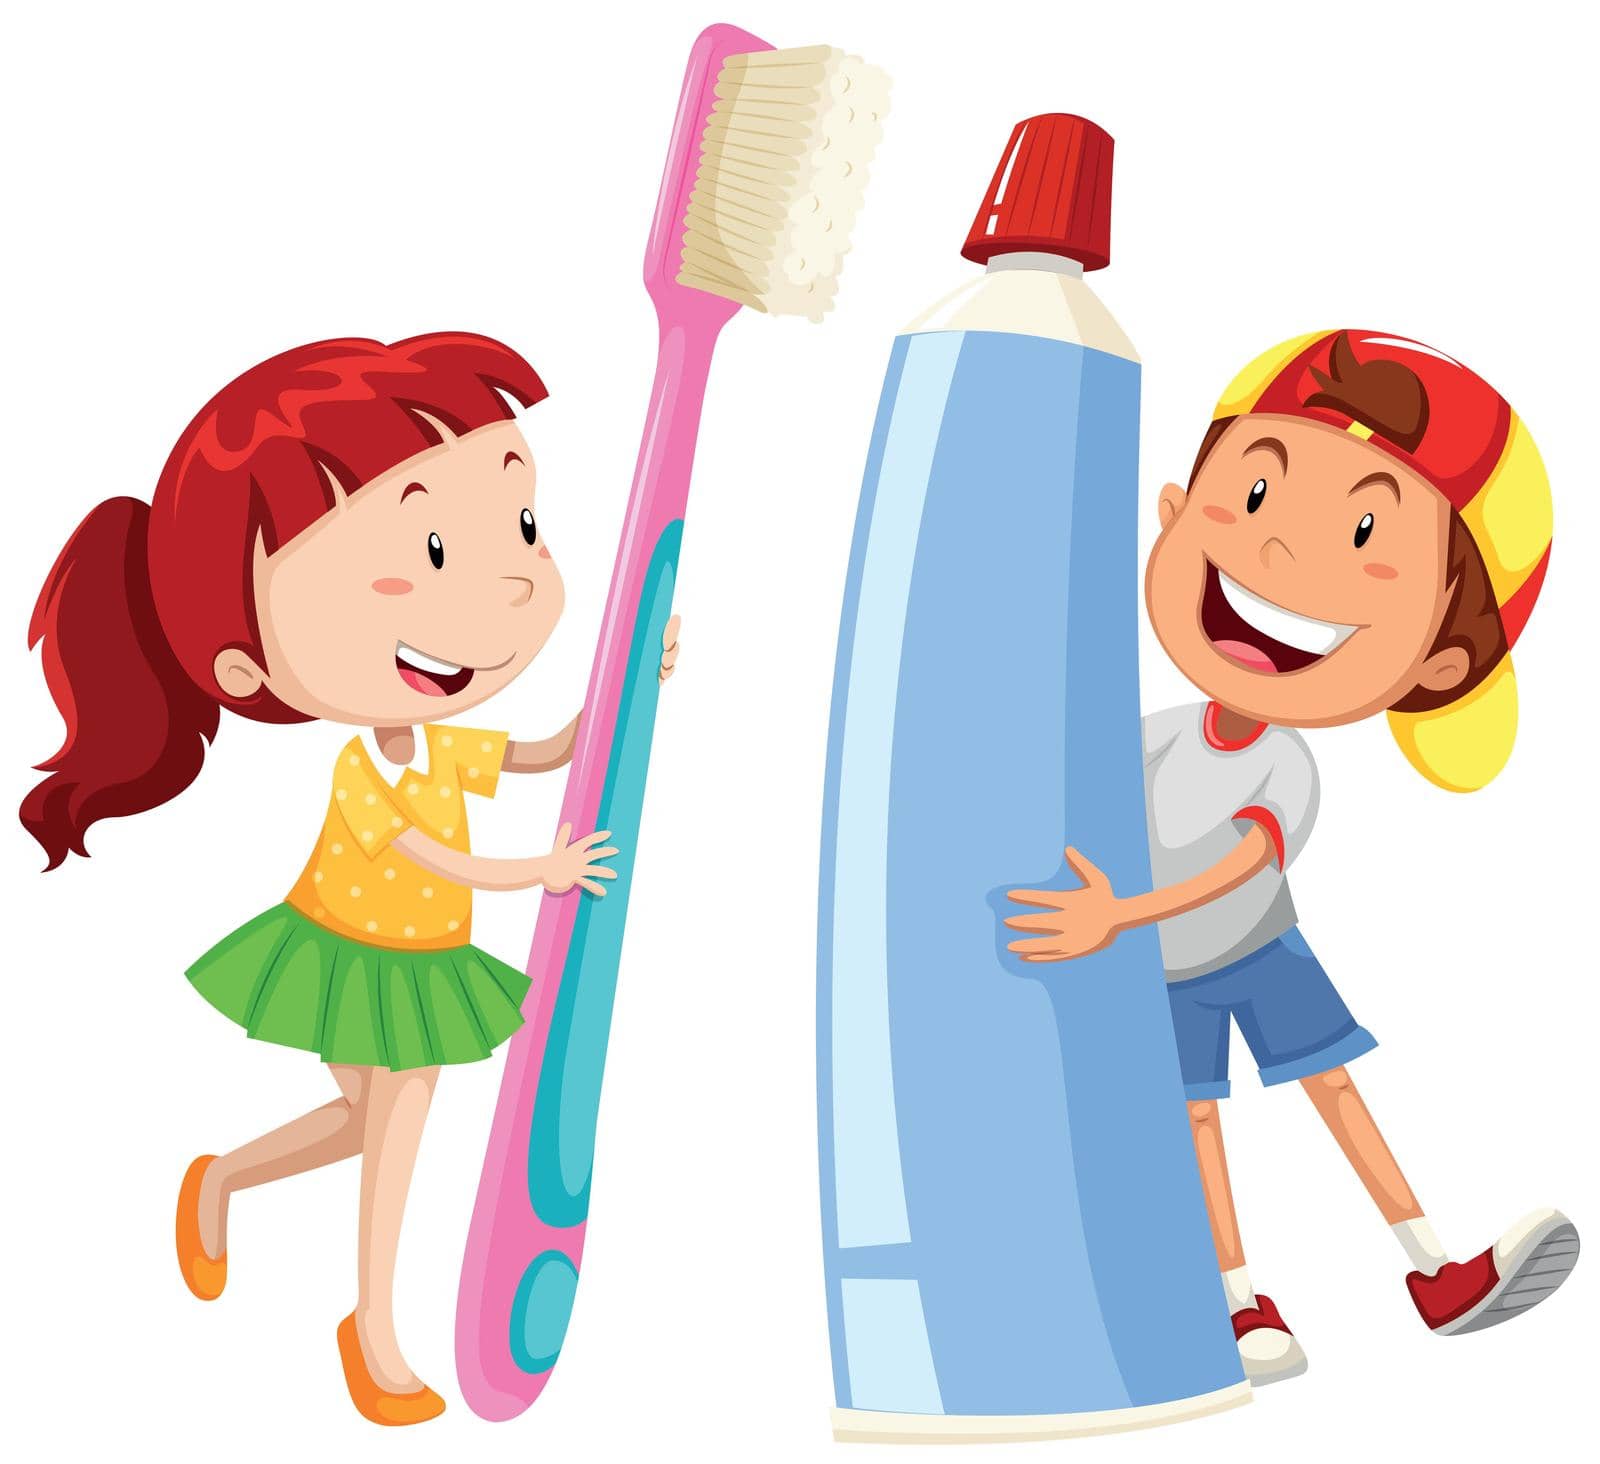 Boy and girl with giant toothbrush and paste illustration